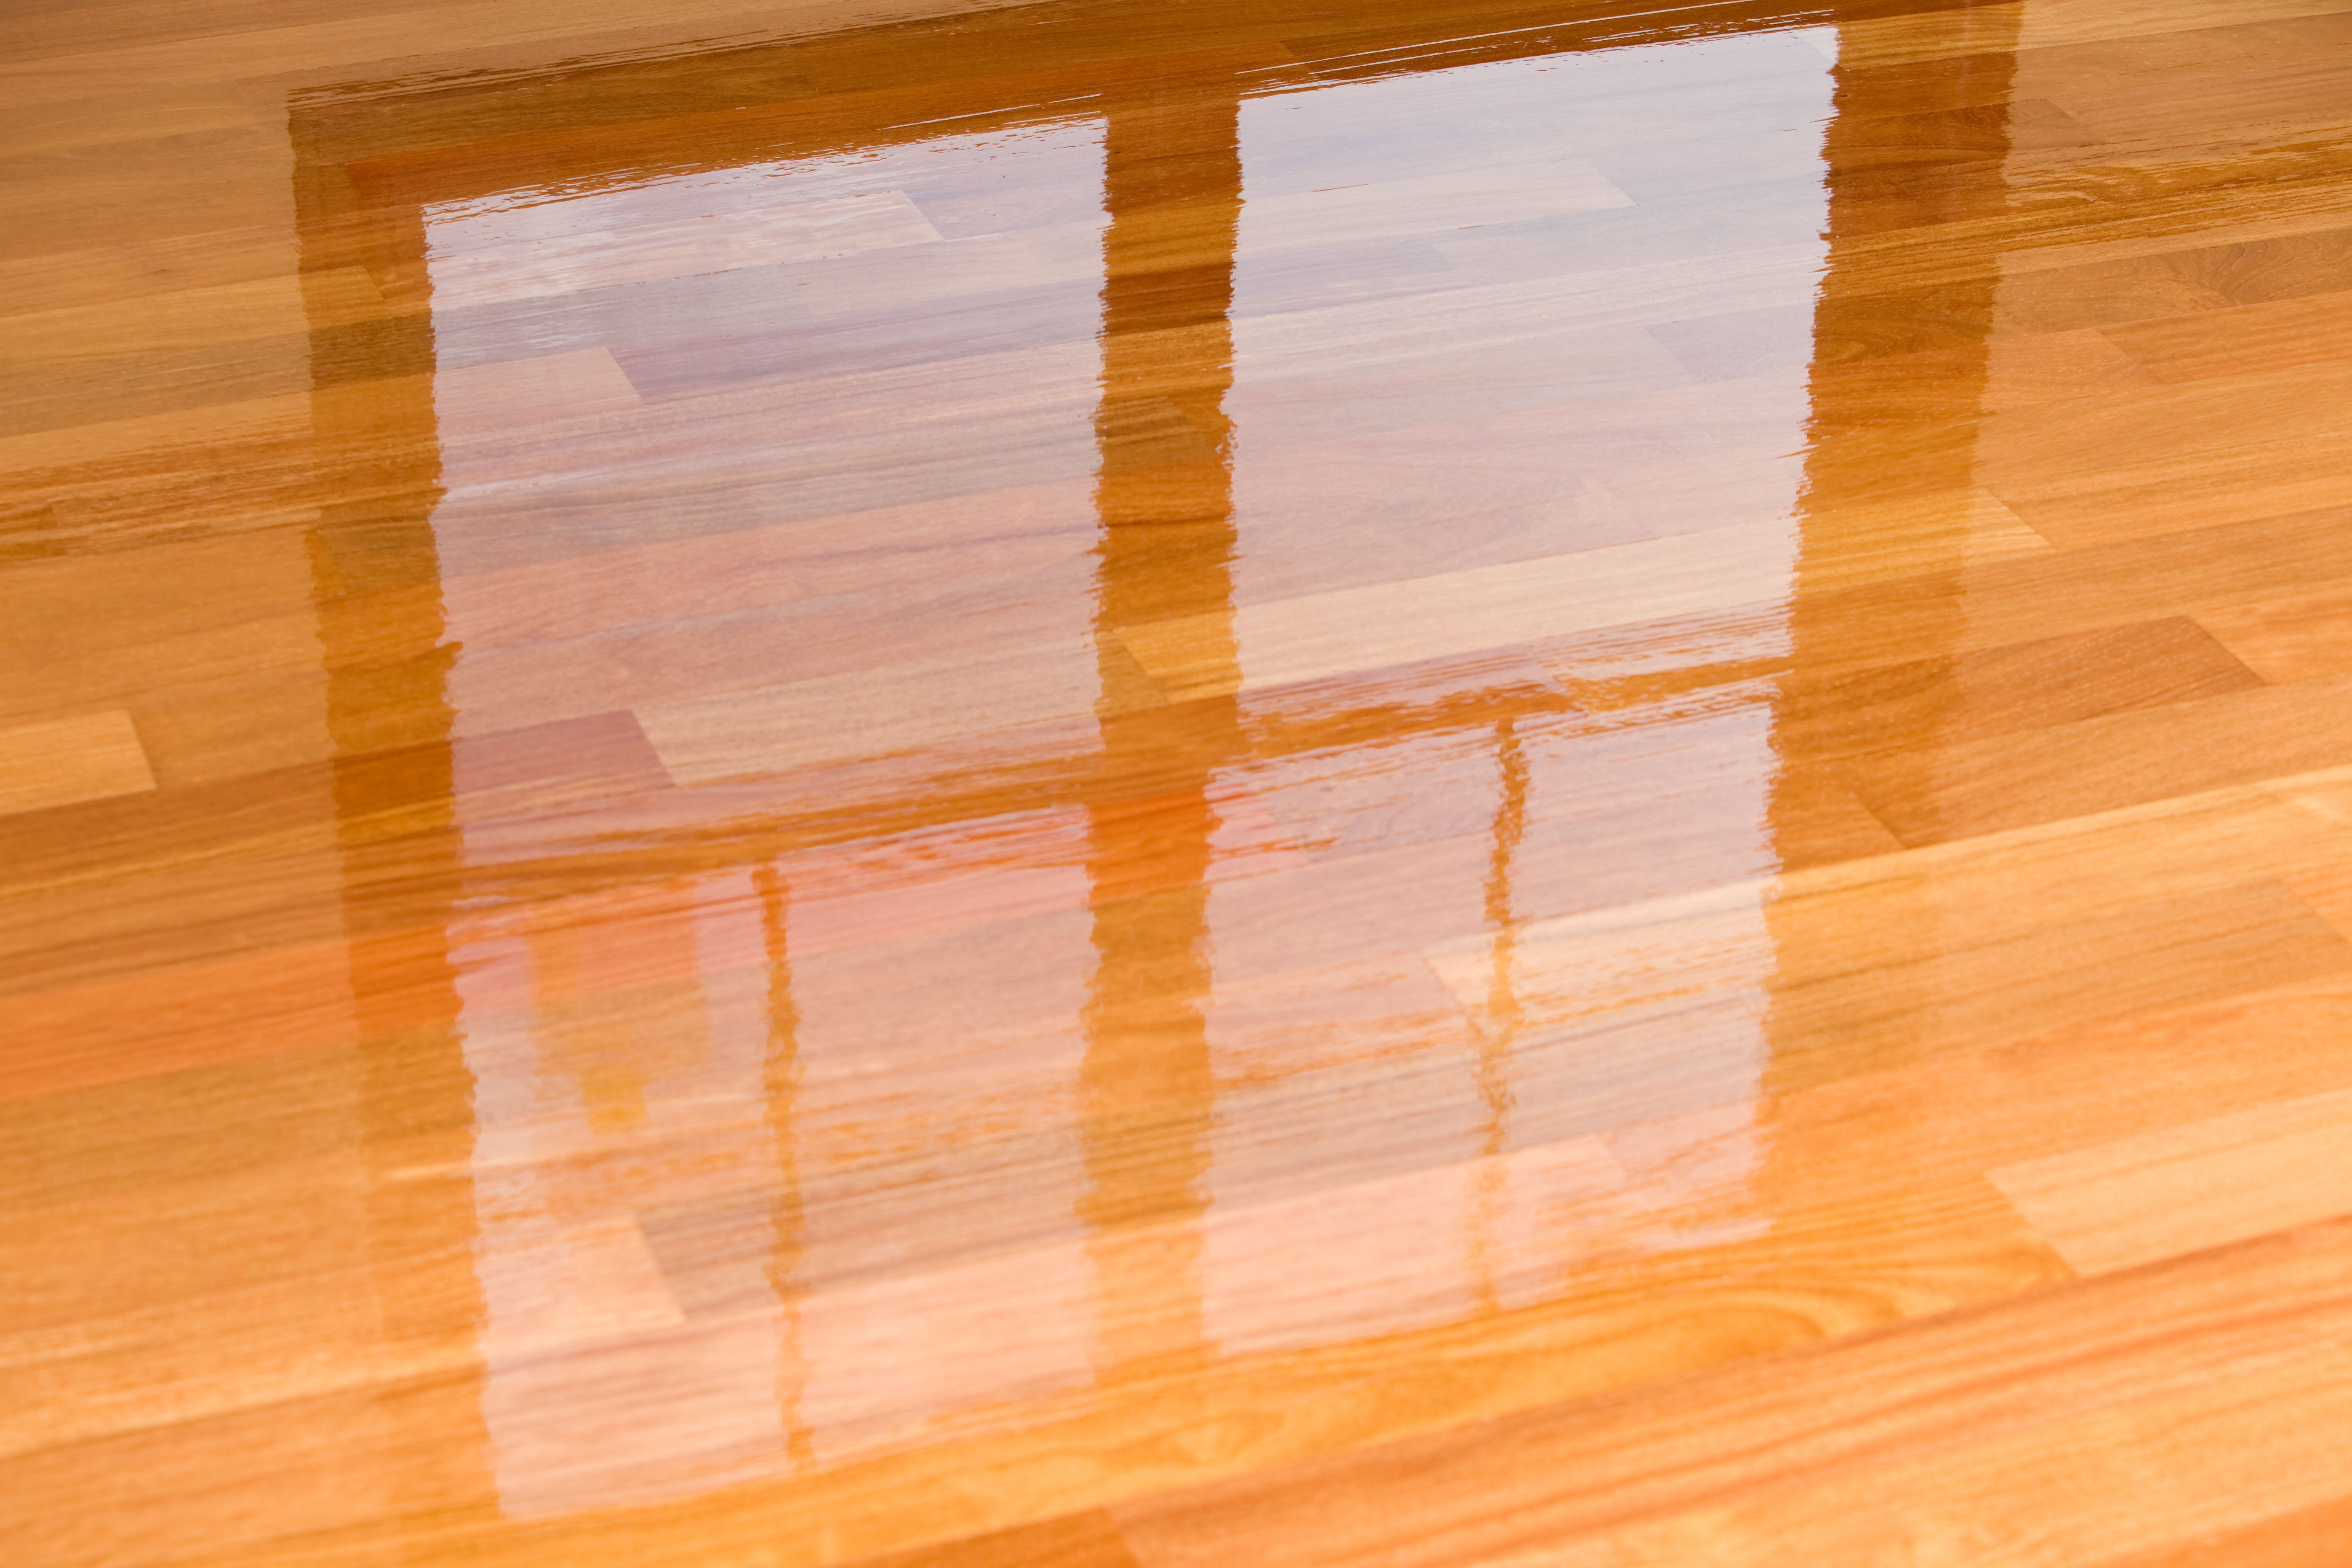 hardwood floor foam tiles of guide to laminate flooring water and damage repair with regard to wet polyurethane on new hardwood floor with window reflection 183846705 582e34da3df78c6f6a403968